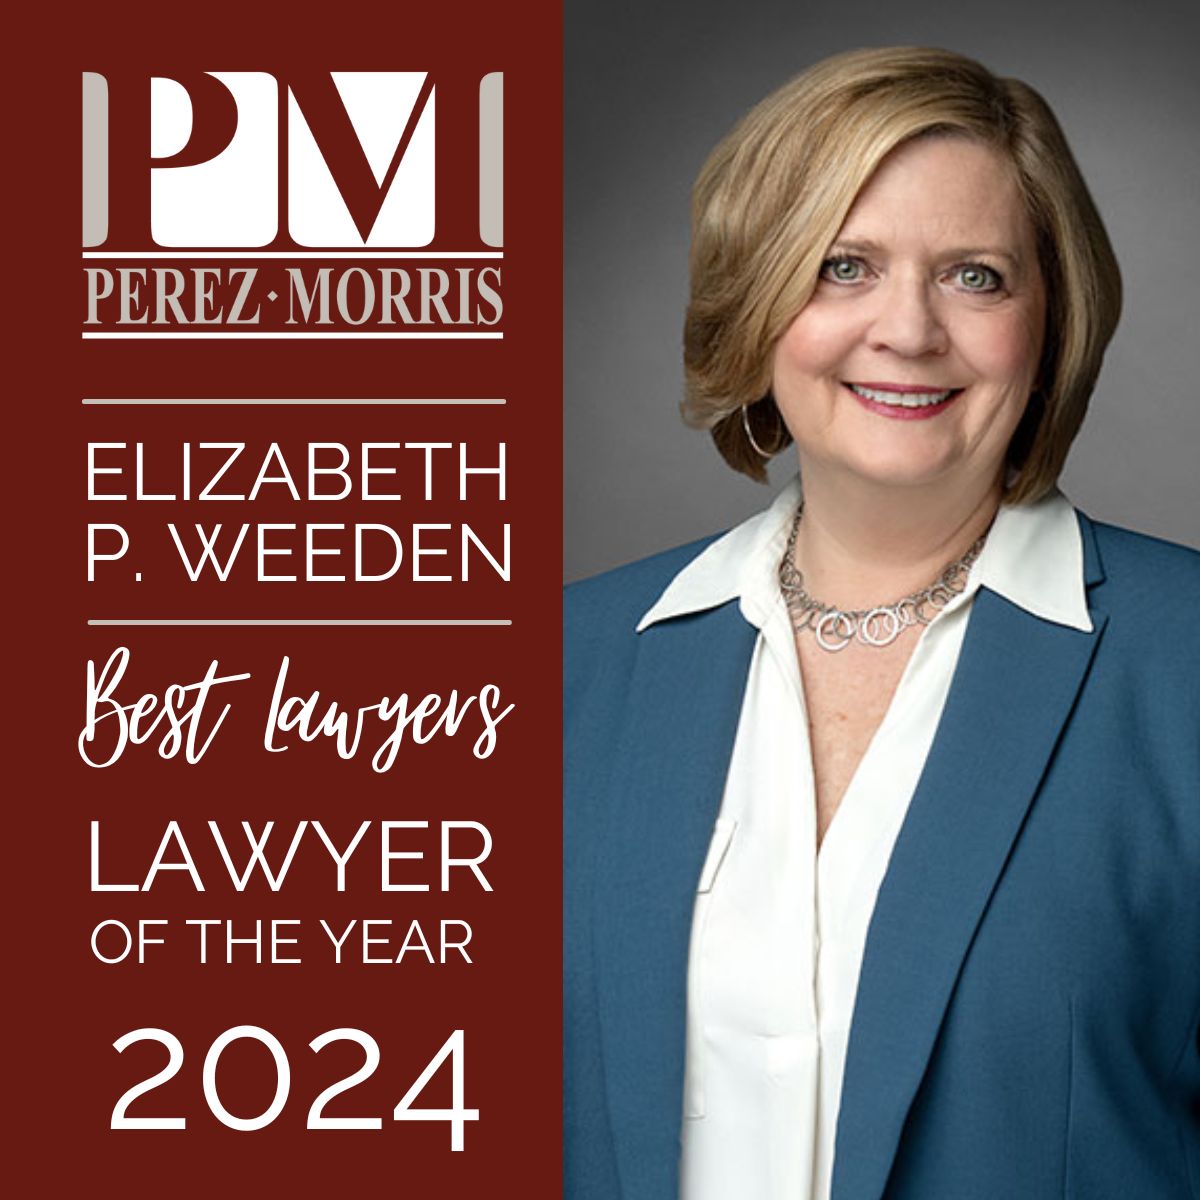 Elizabeth P. Weeden Named "Lawyer of the Year" in the 2024 edition of The Best Lawyers in America©